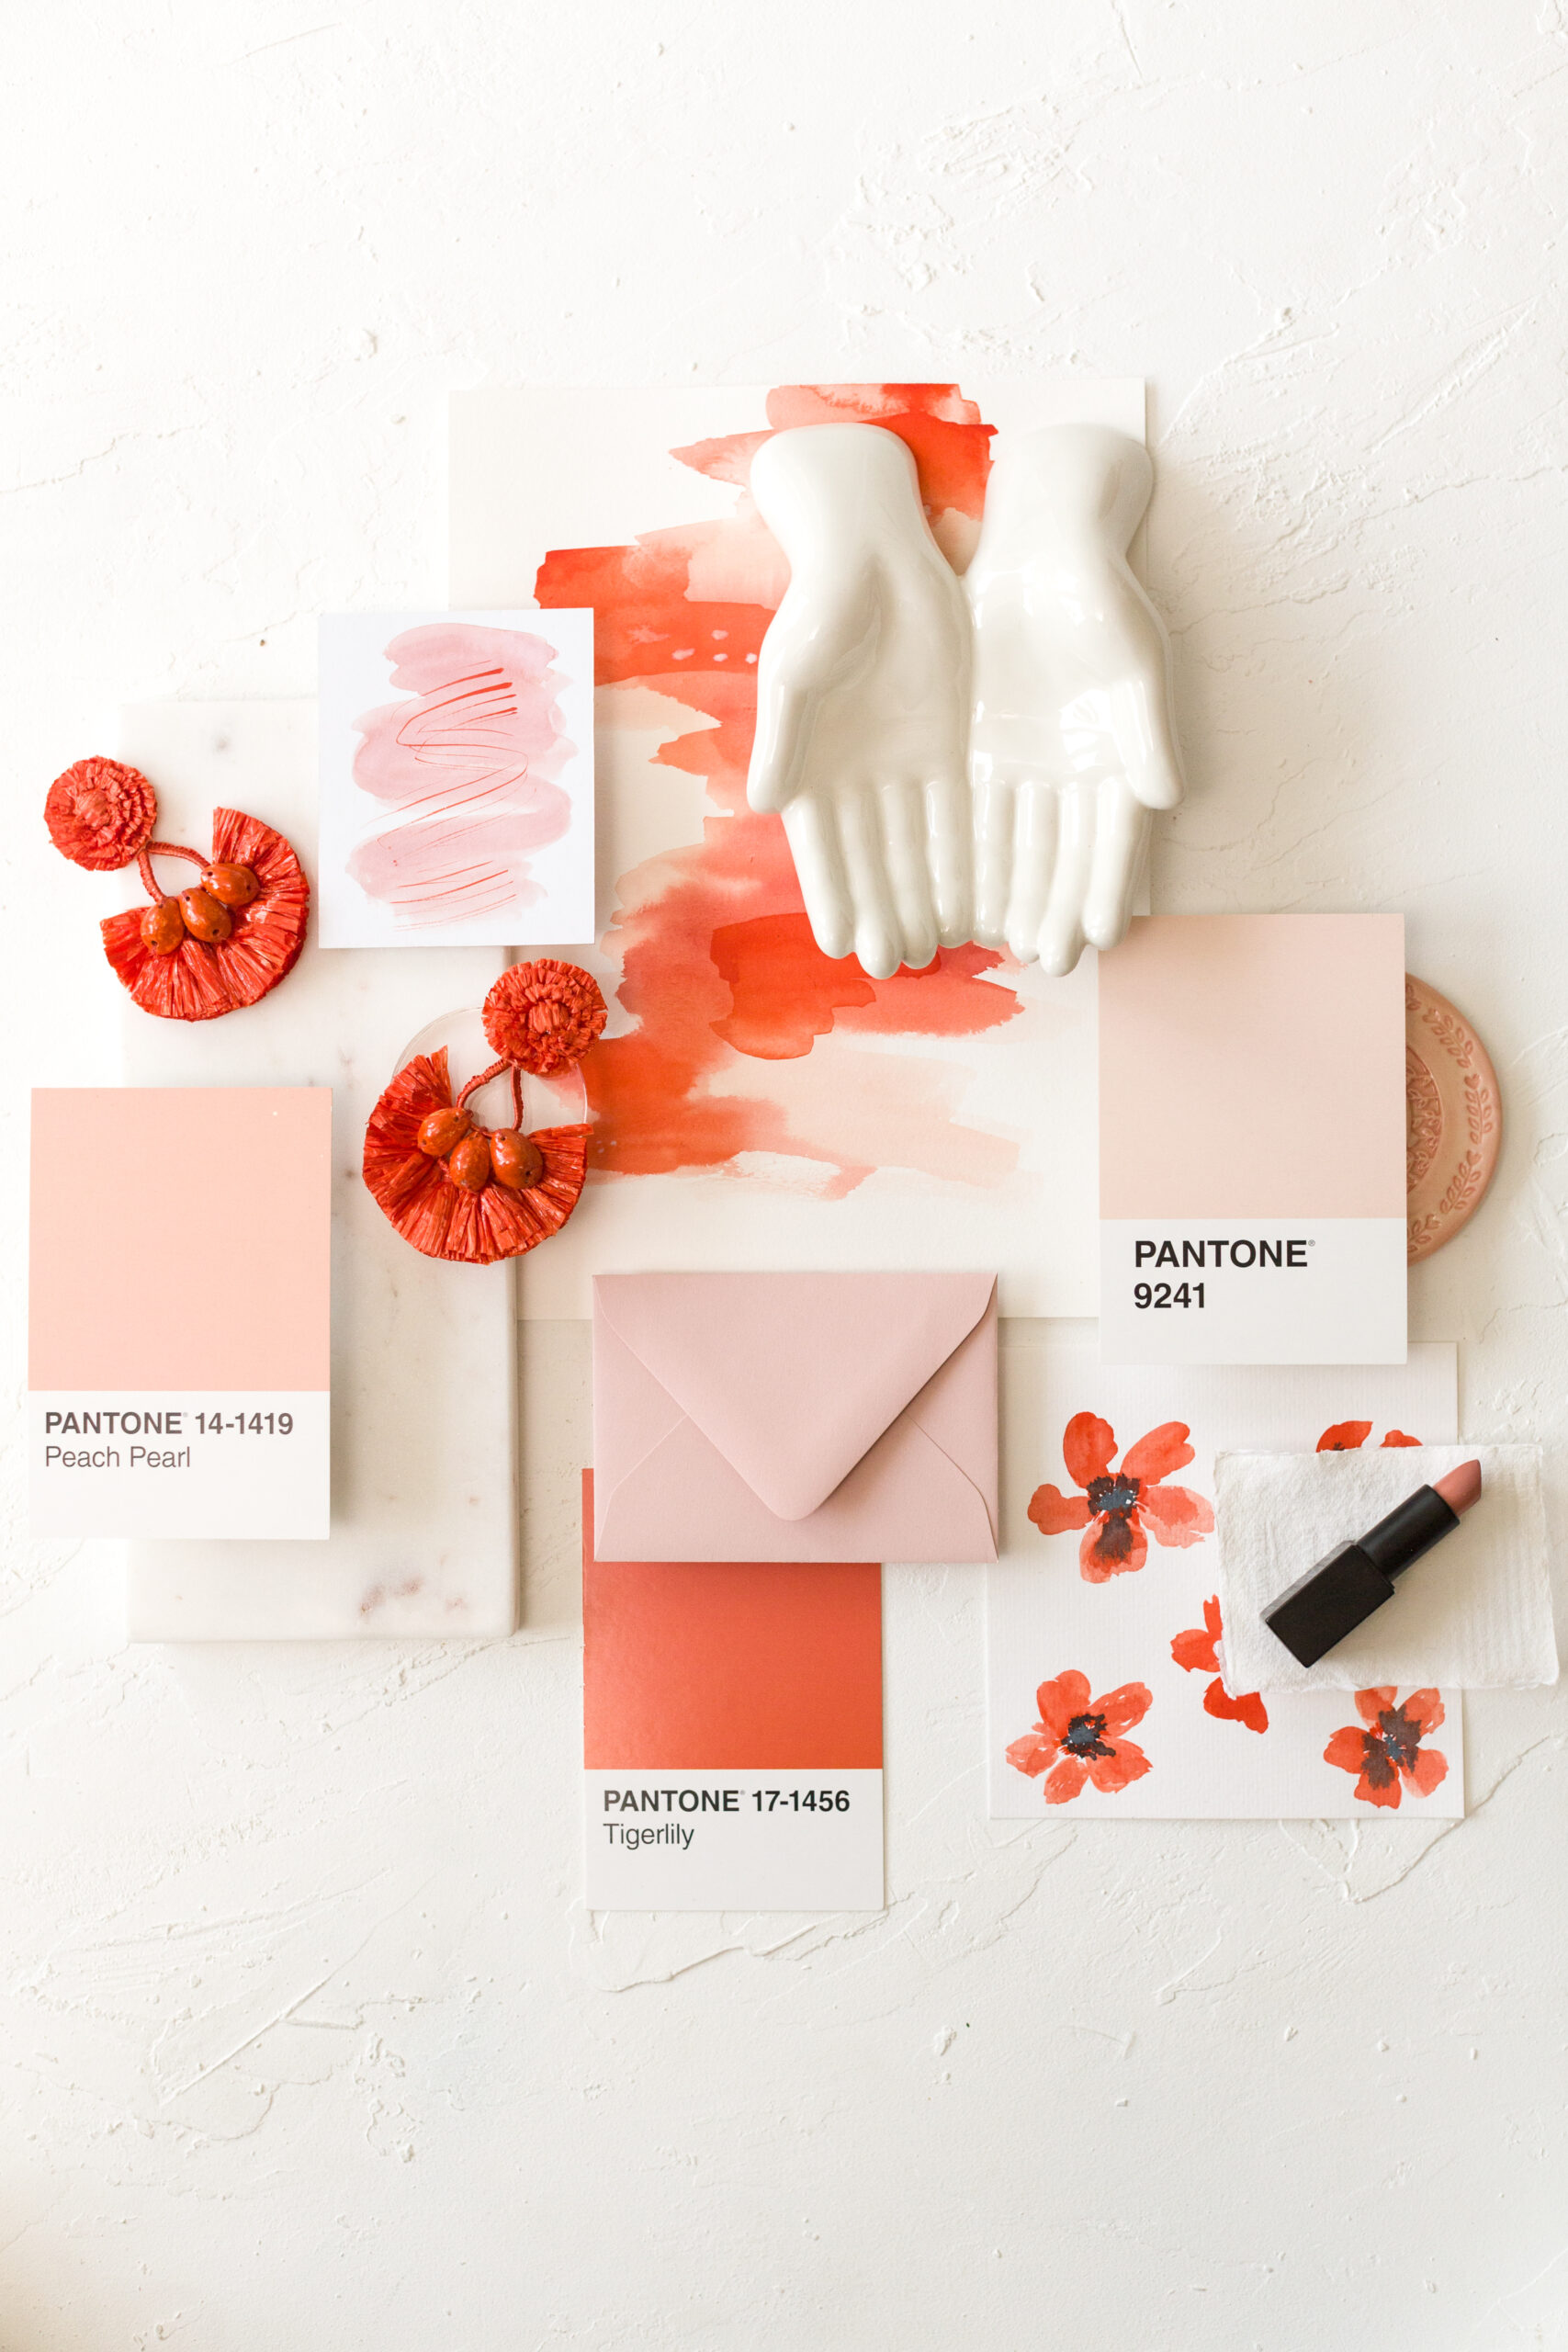 Pantone's new color palette for spring with imposter syndrome in the wedding industry.